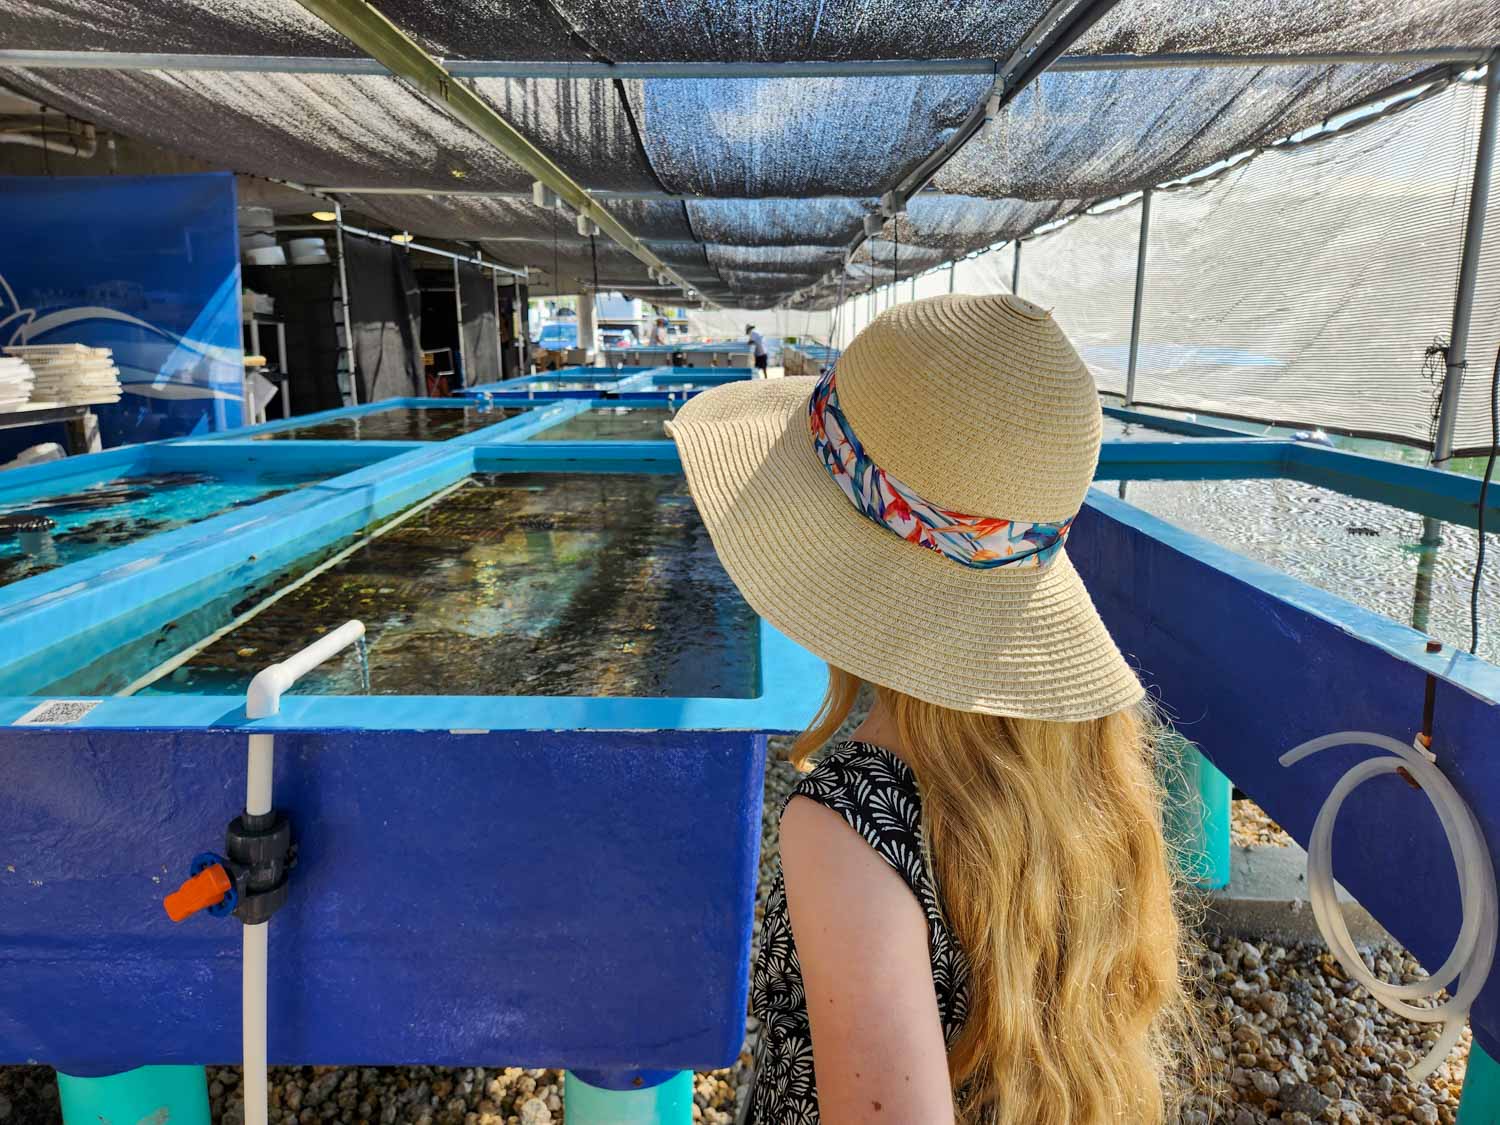 My daughter looks towards some of the tanks of coral during a public tour of the Mote Marine Laboratory in Summerland Key, one of the most unusual things to do on a Florida Keys road trip with kids